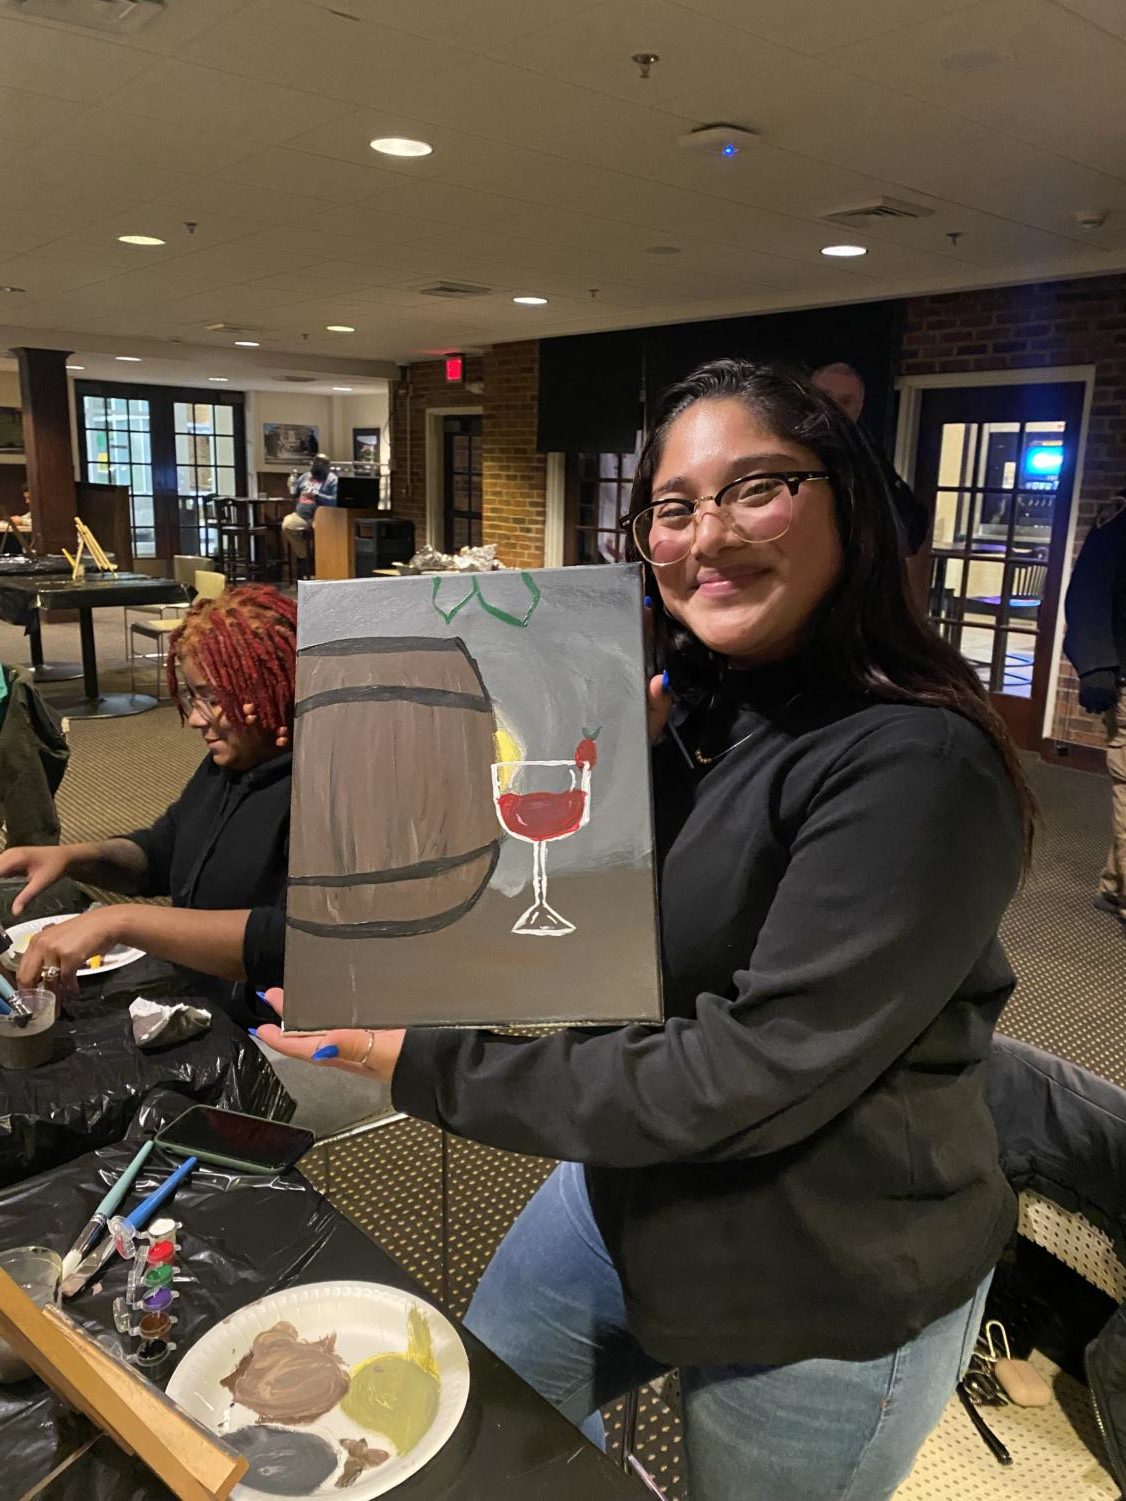 Students+Sip+Mocktails+While+Creating+Art